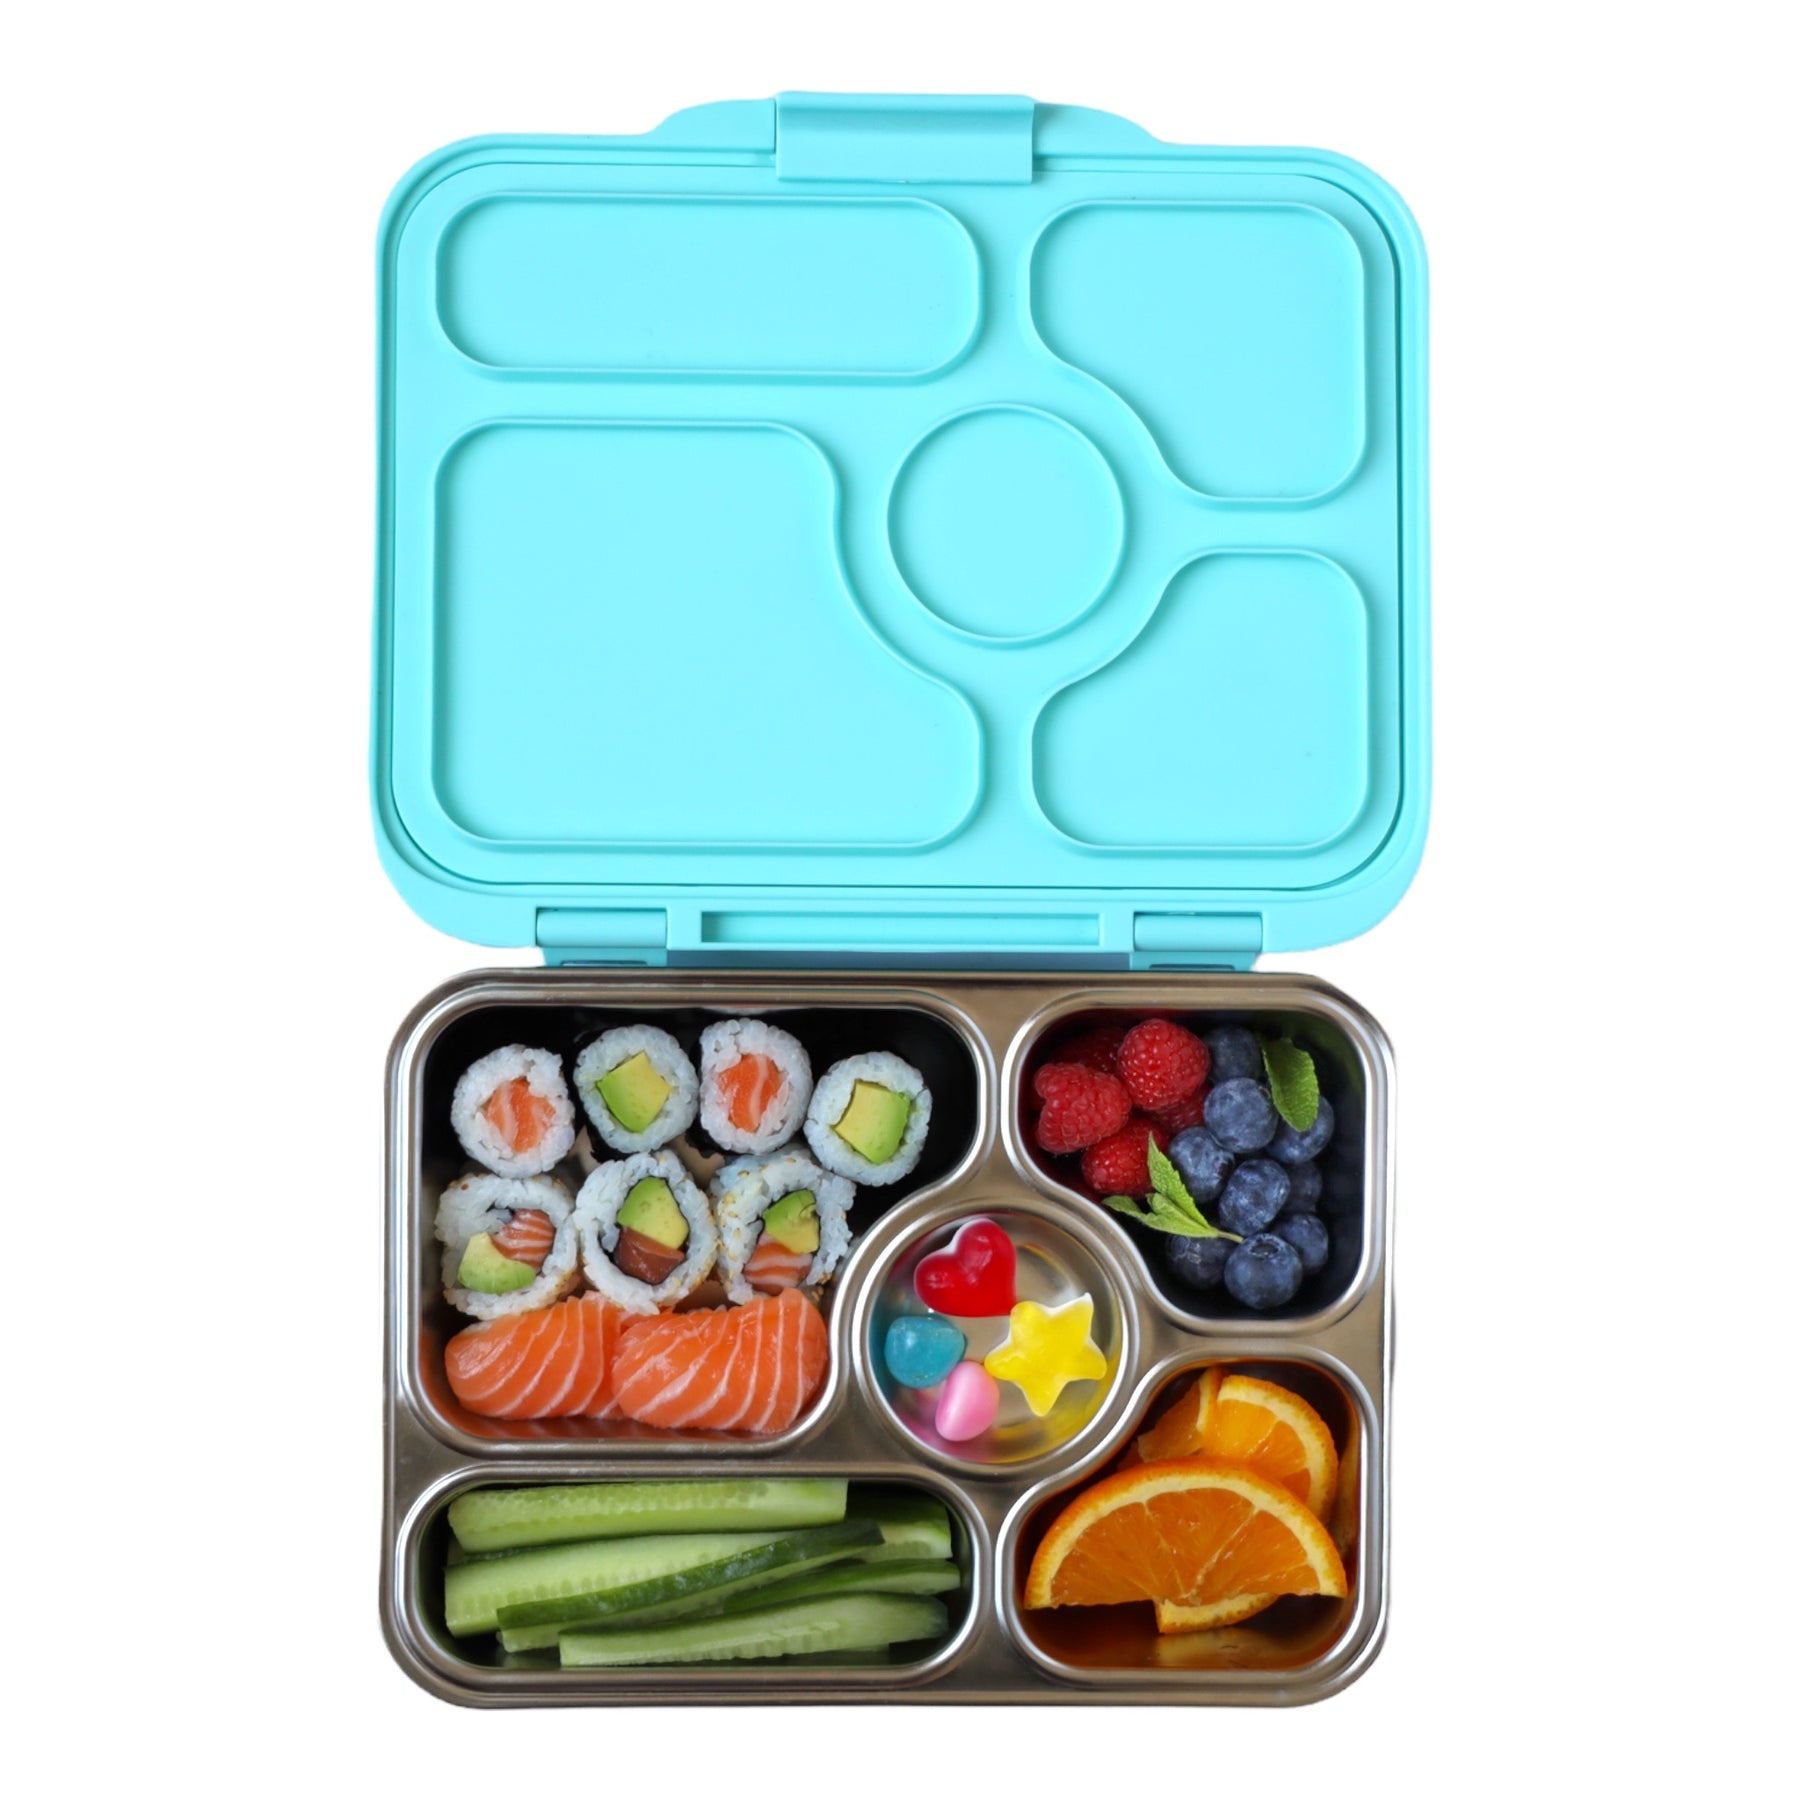 Yumbox Presto Stainless Steel Leakproof Bento Box – South Coast Baby Co